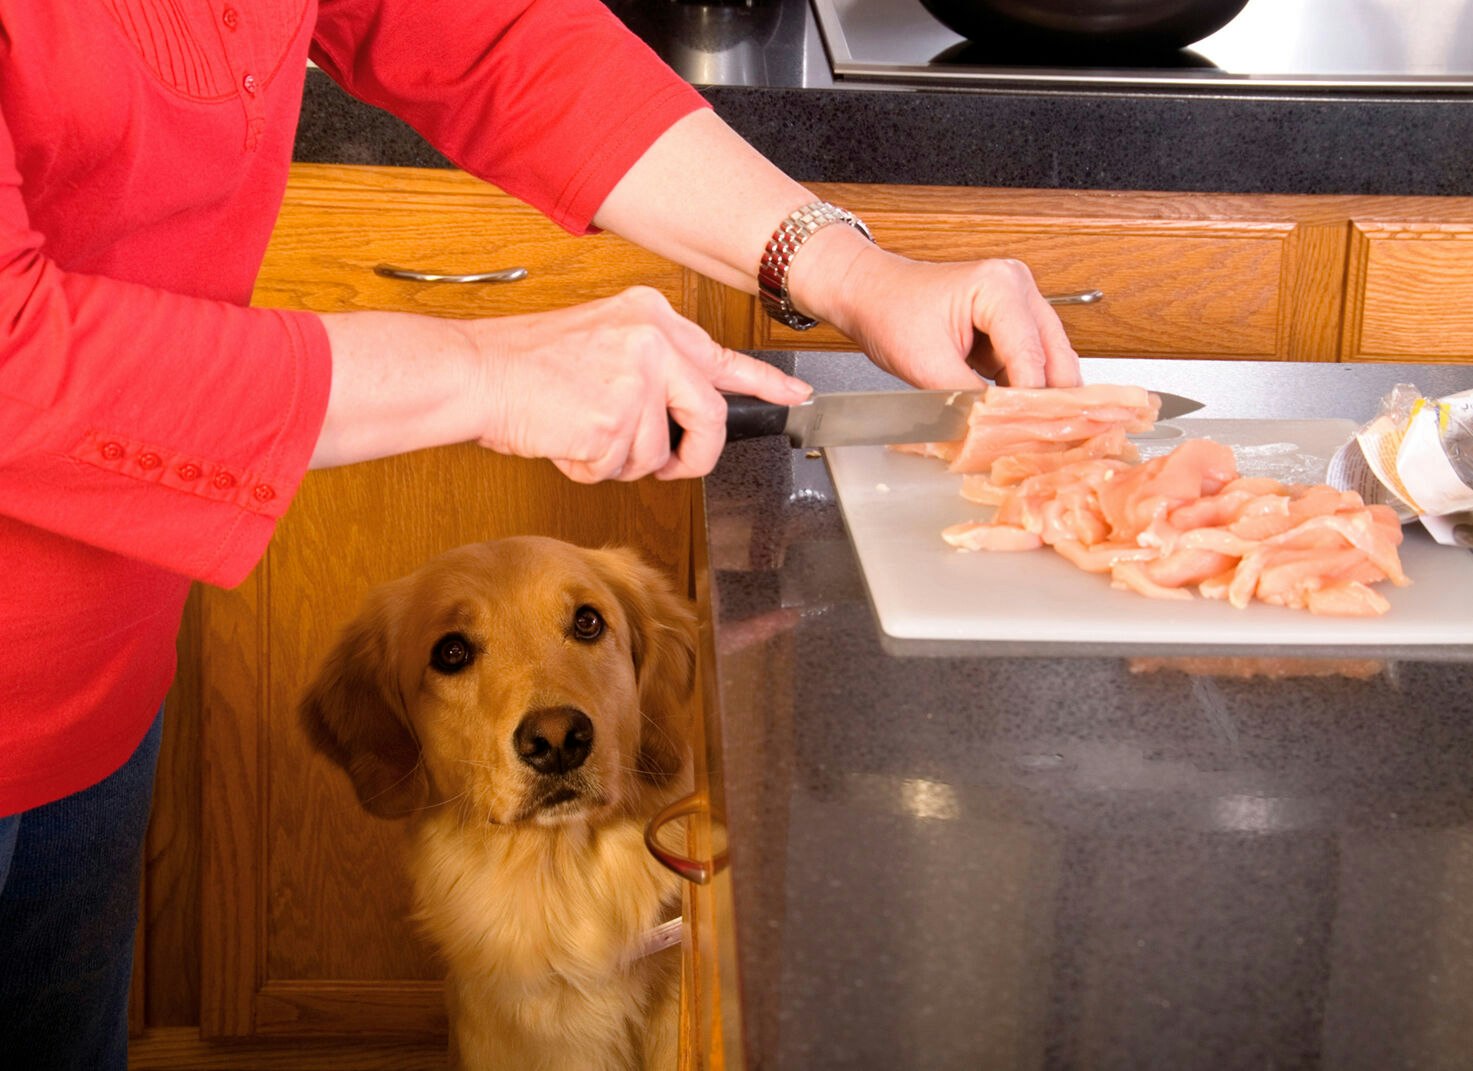 A major concern with BARF diets is the possible danger to human health when handling raw meat.